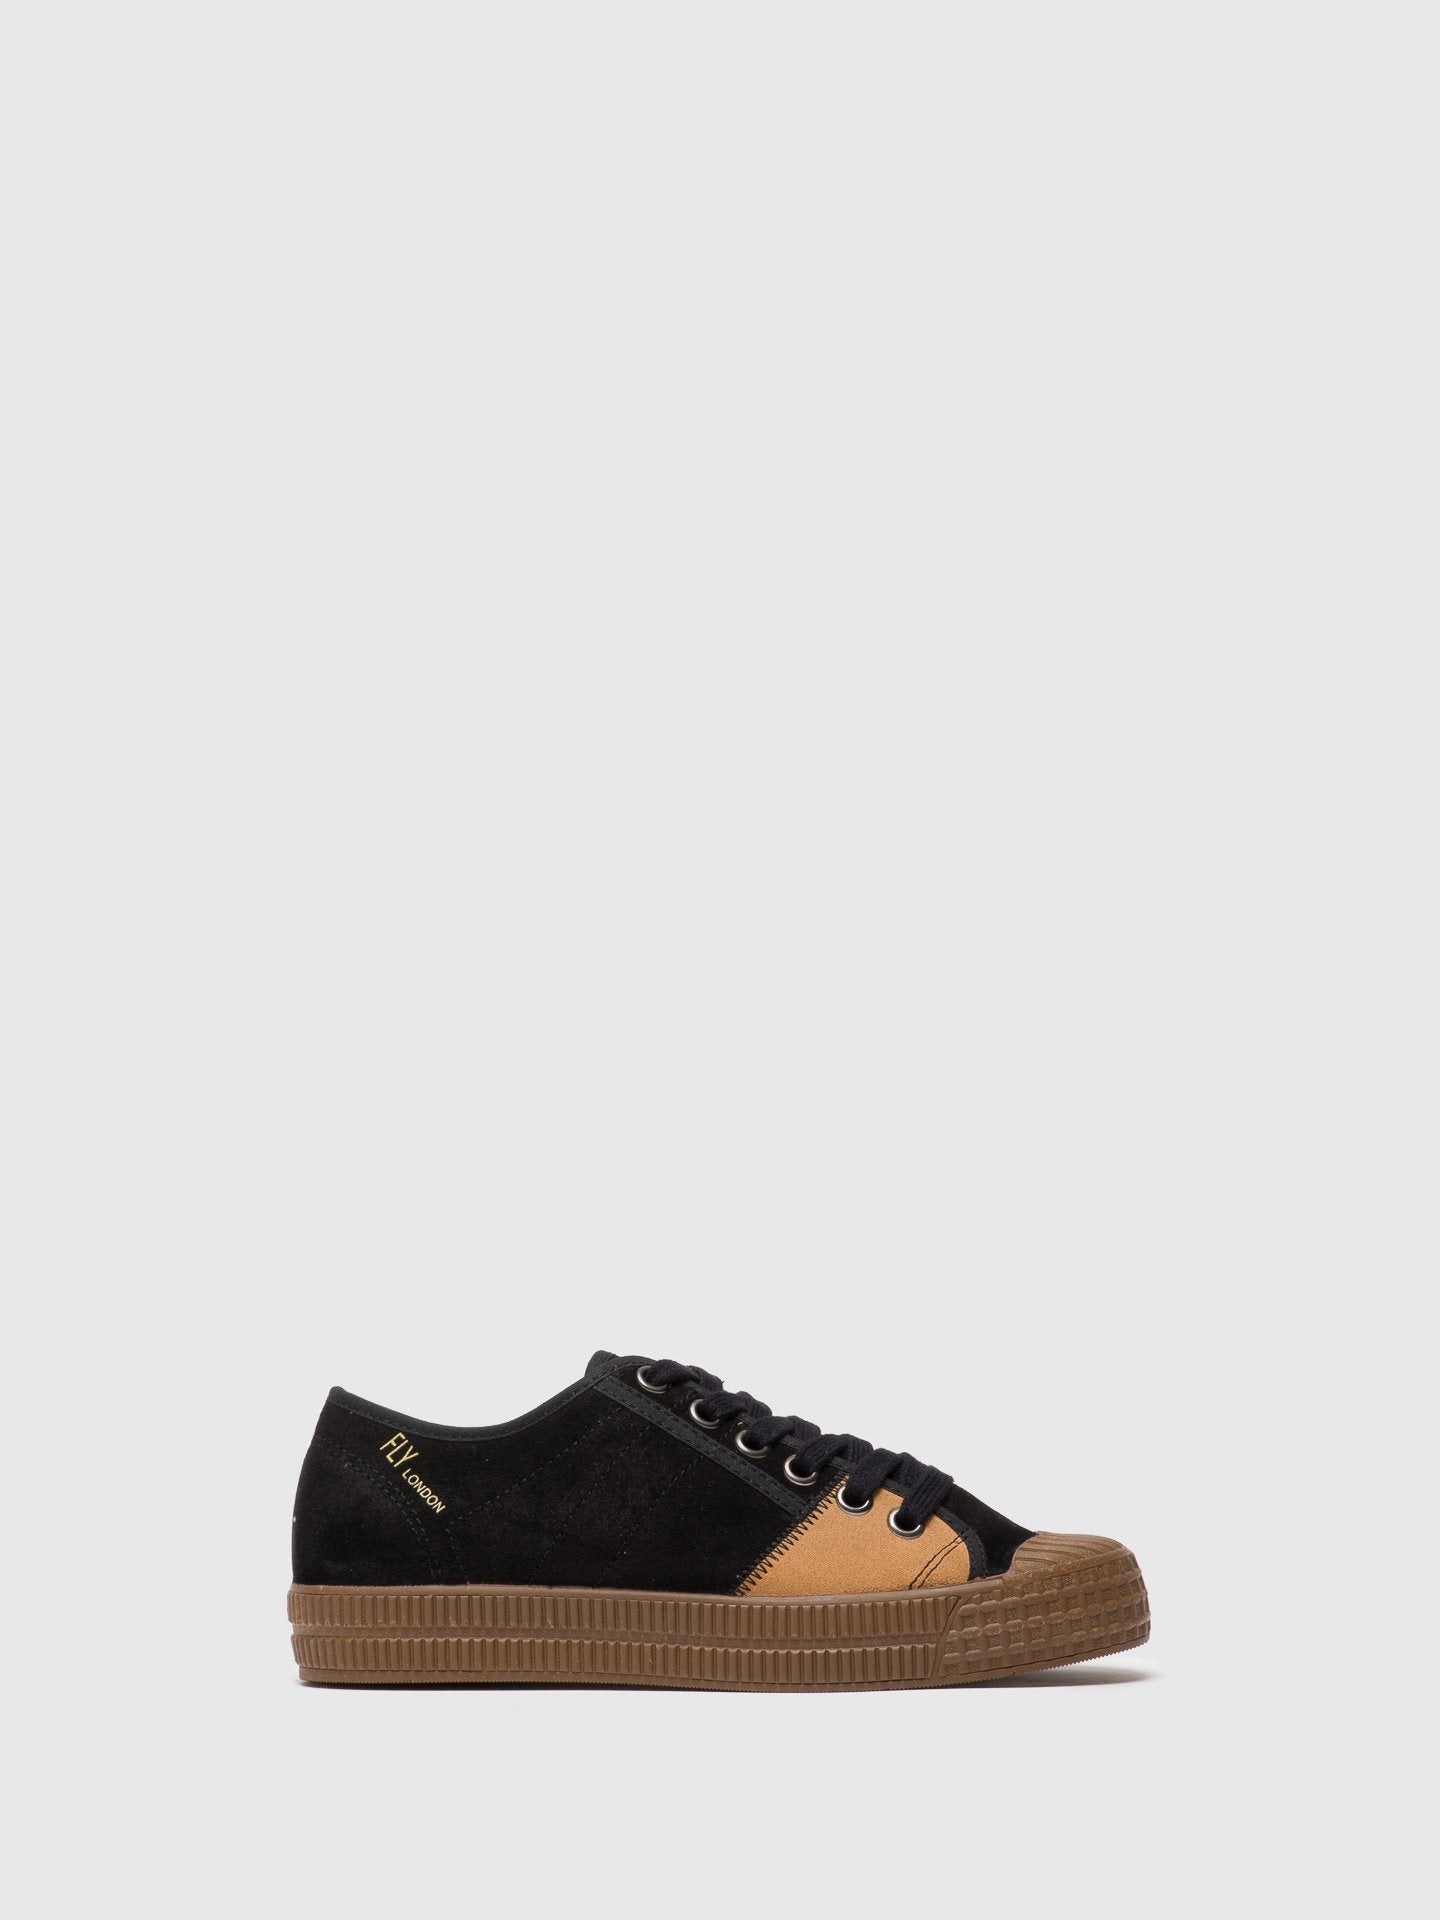 Fly London Black Low-Top Trainers